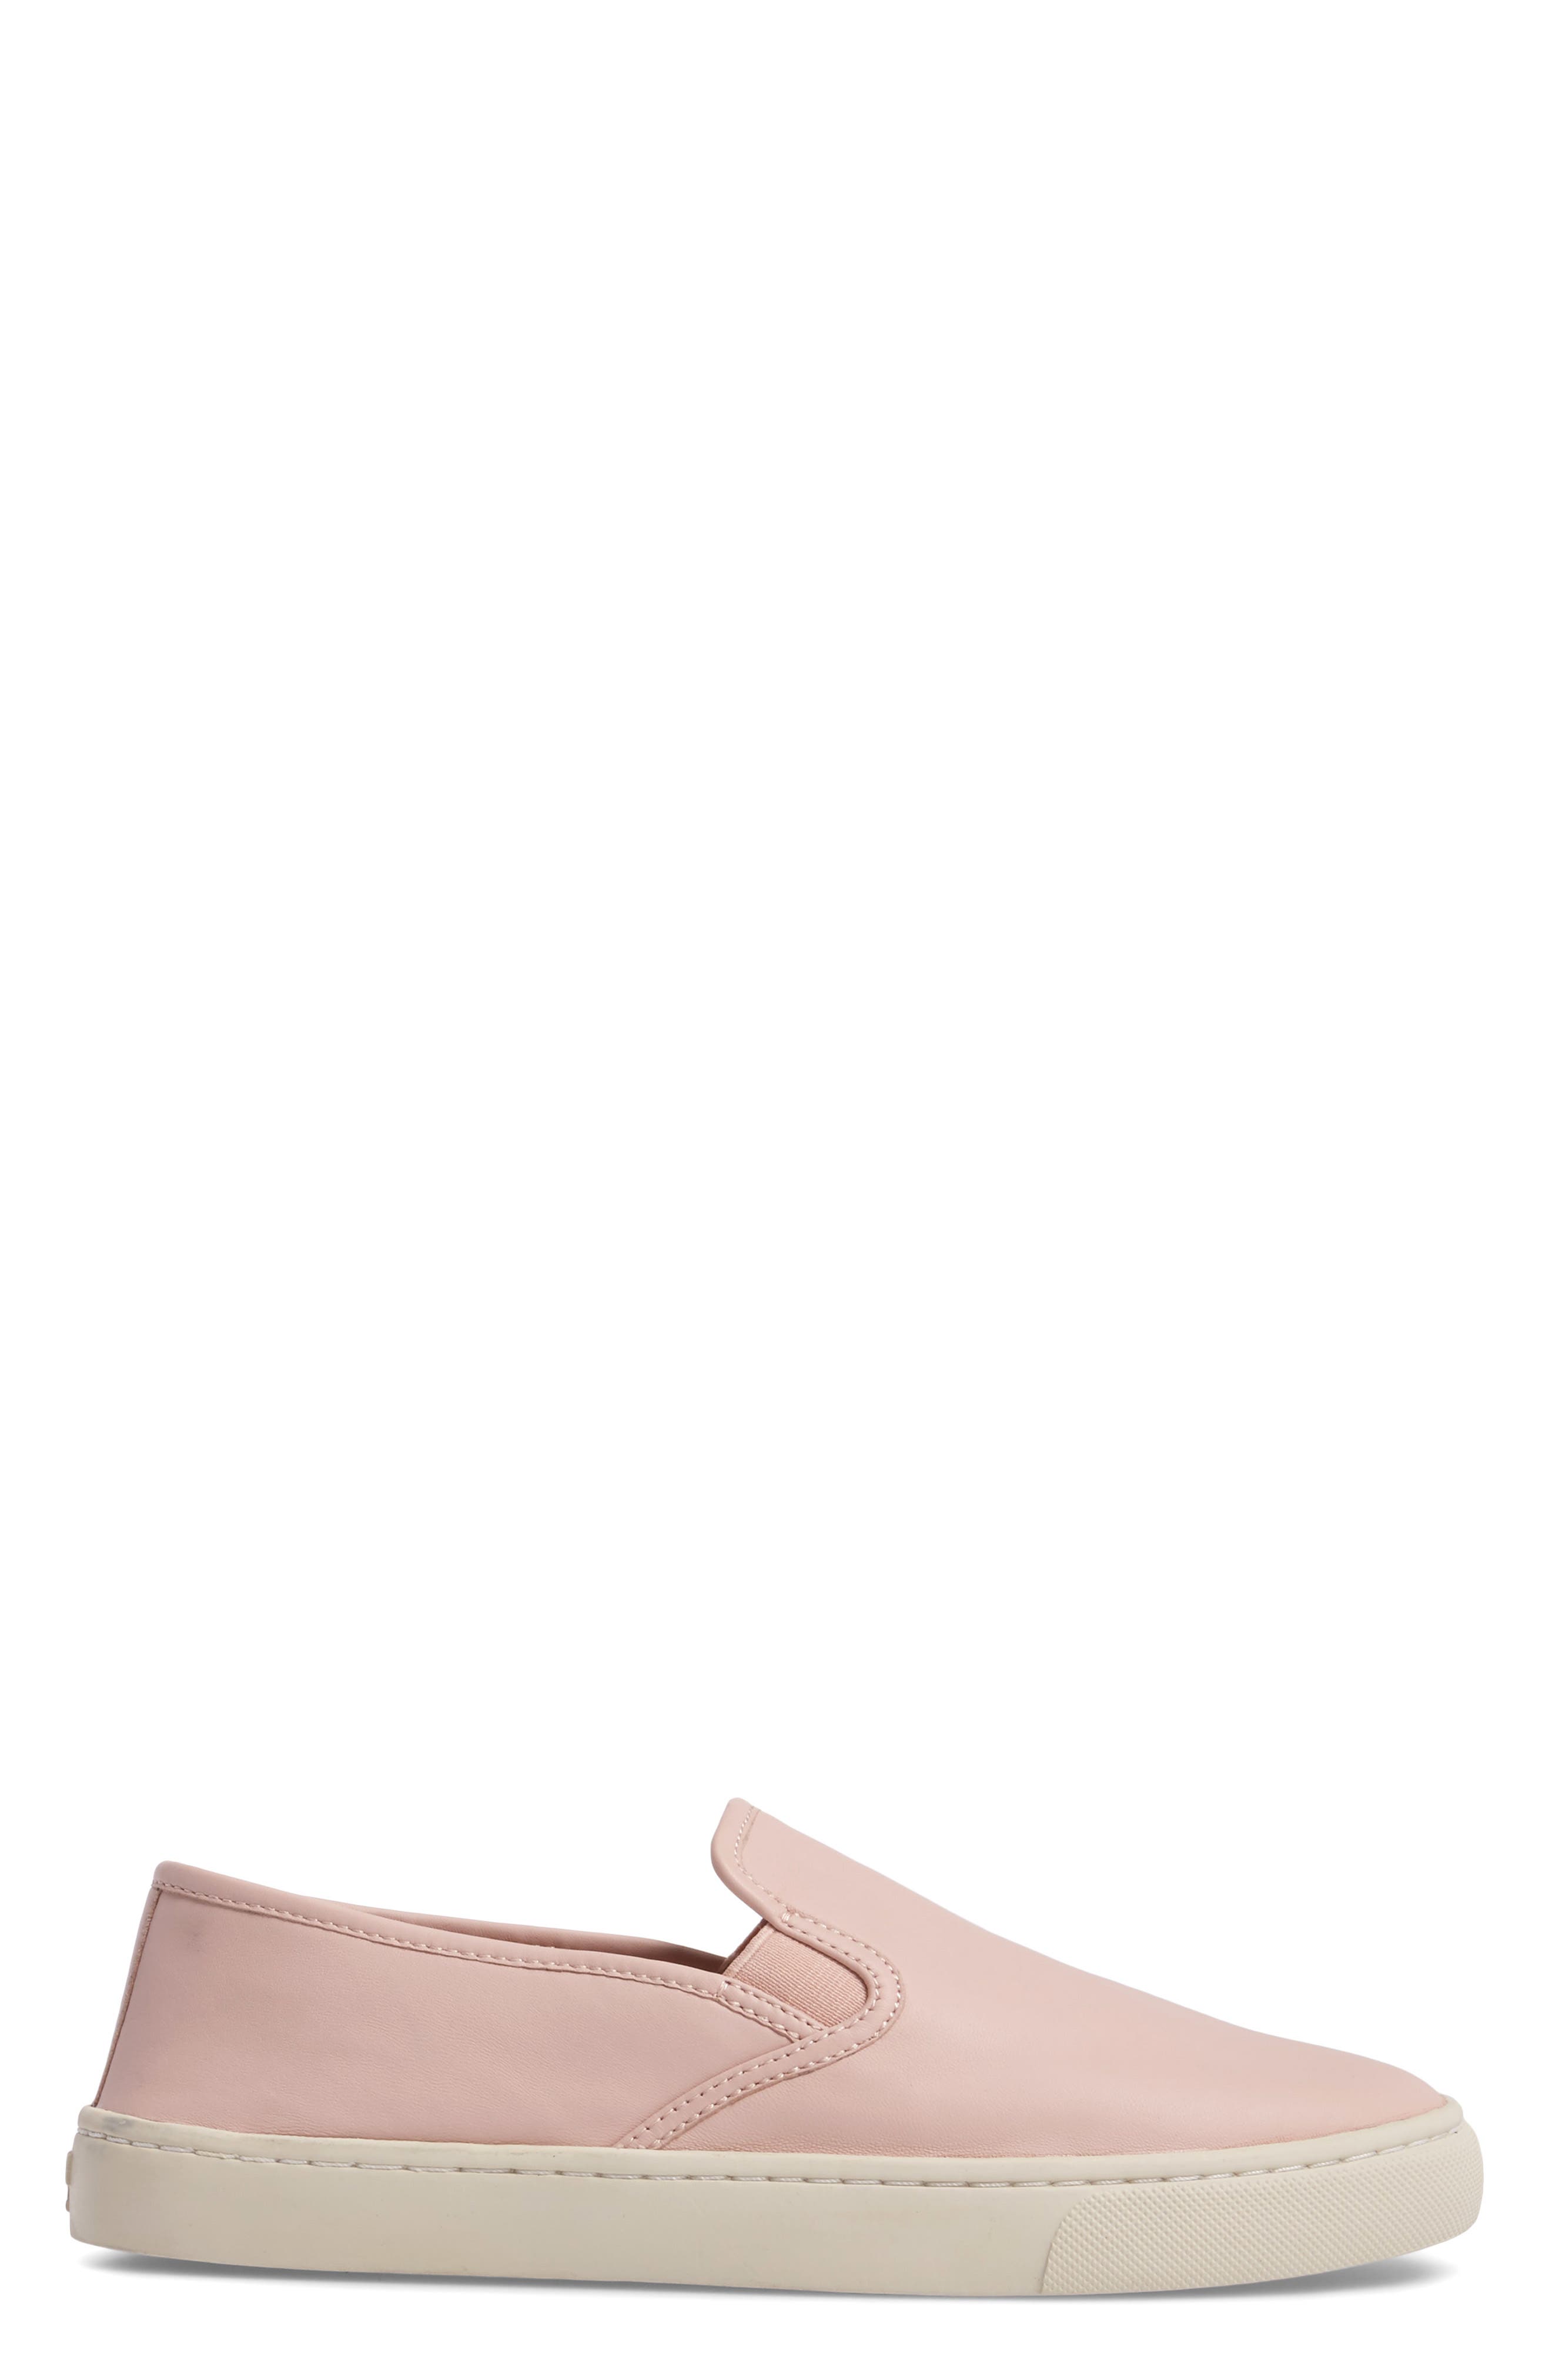 Tory Burch | Max Leather Slip-On 